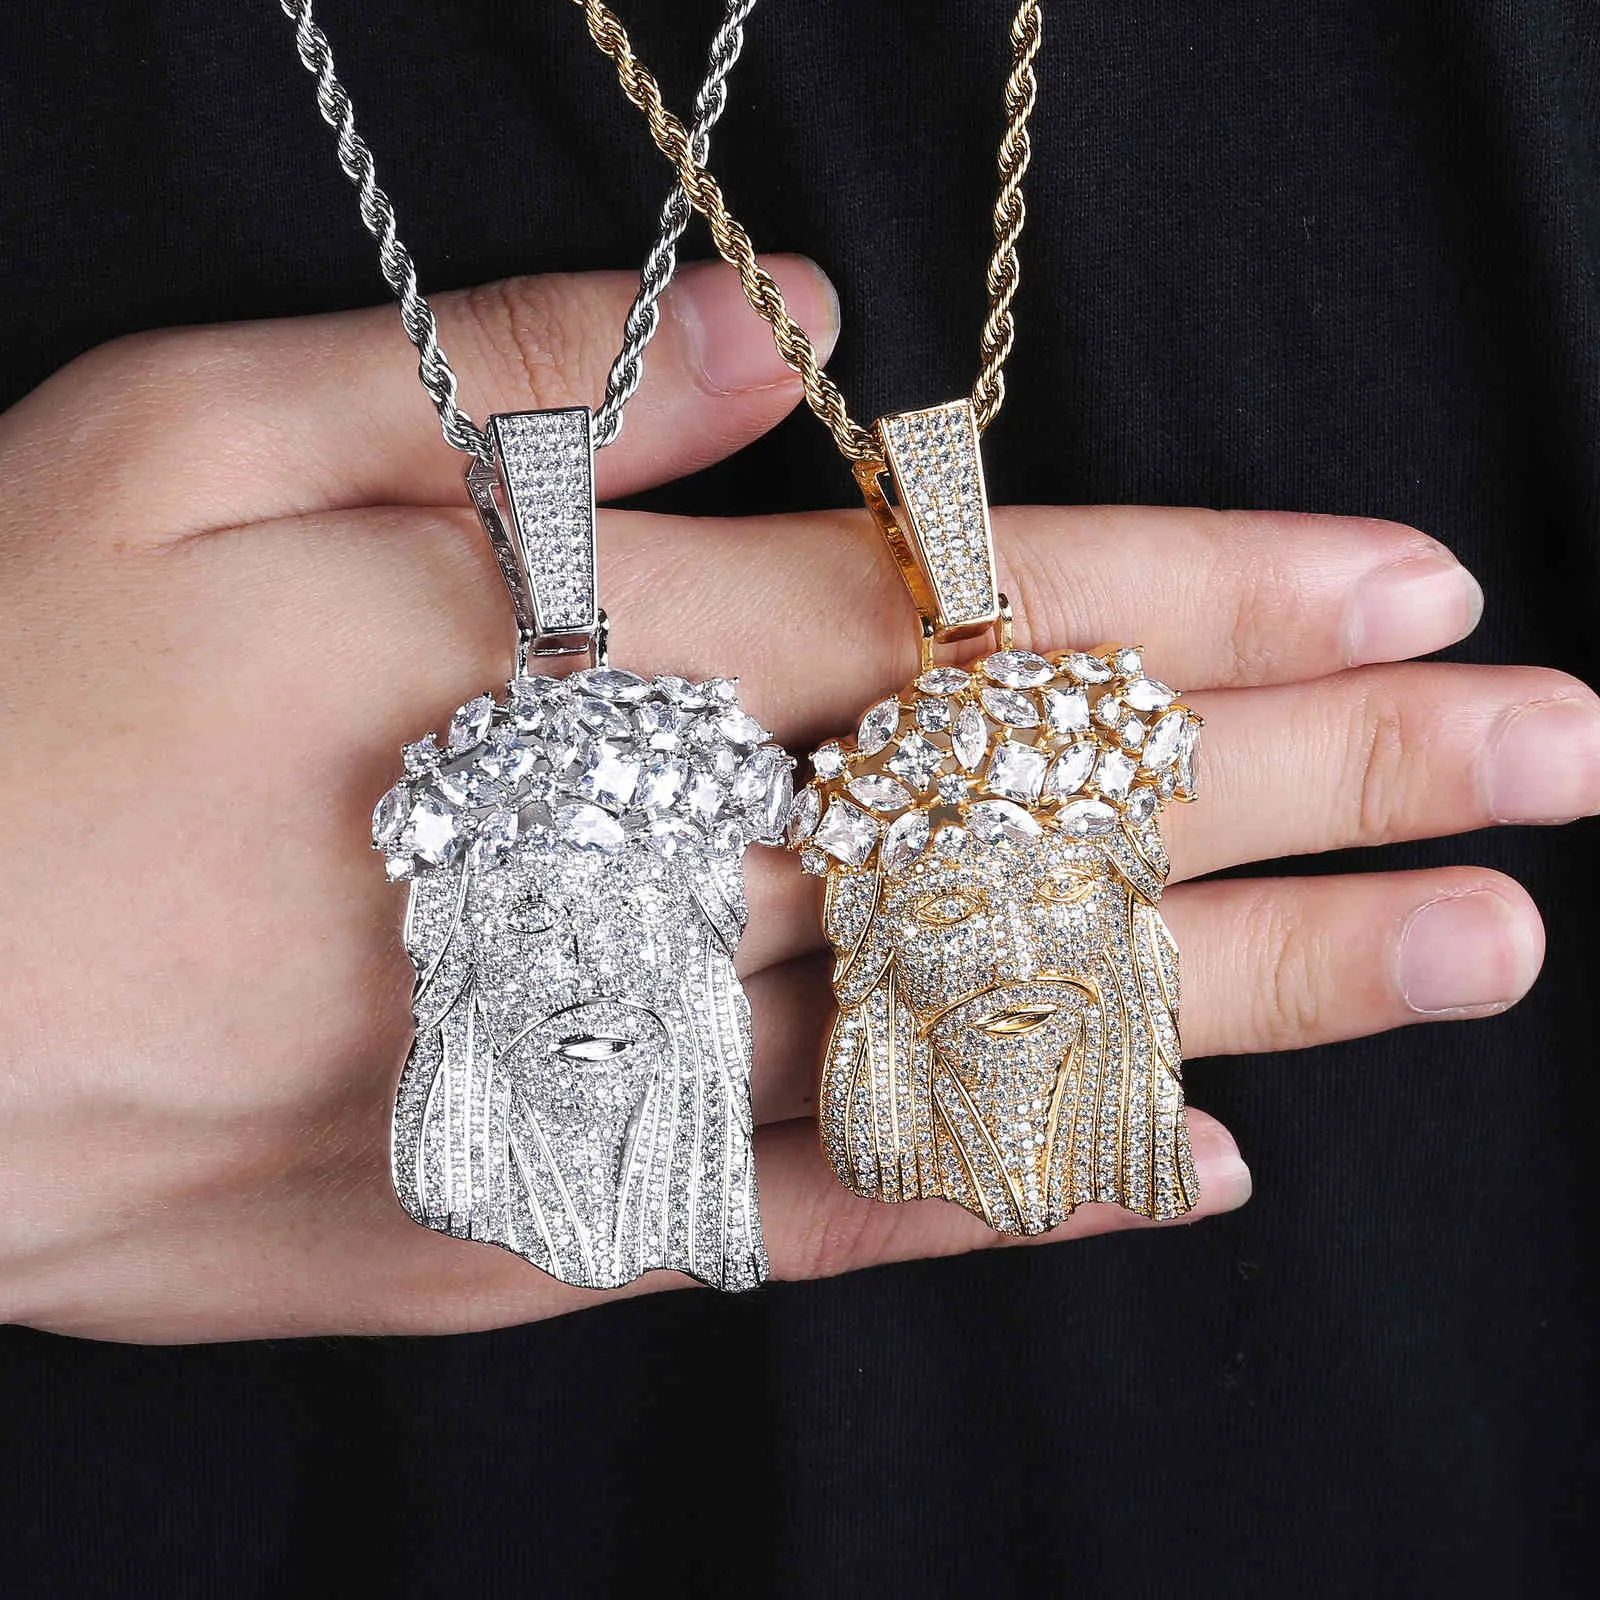 New Big Size Jesus Pendant Necklace With Tennis Chain Mens Iced Out Charm Jewelry Gold Silver Color Chain Hip Hop Jewelry 210323192G